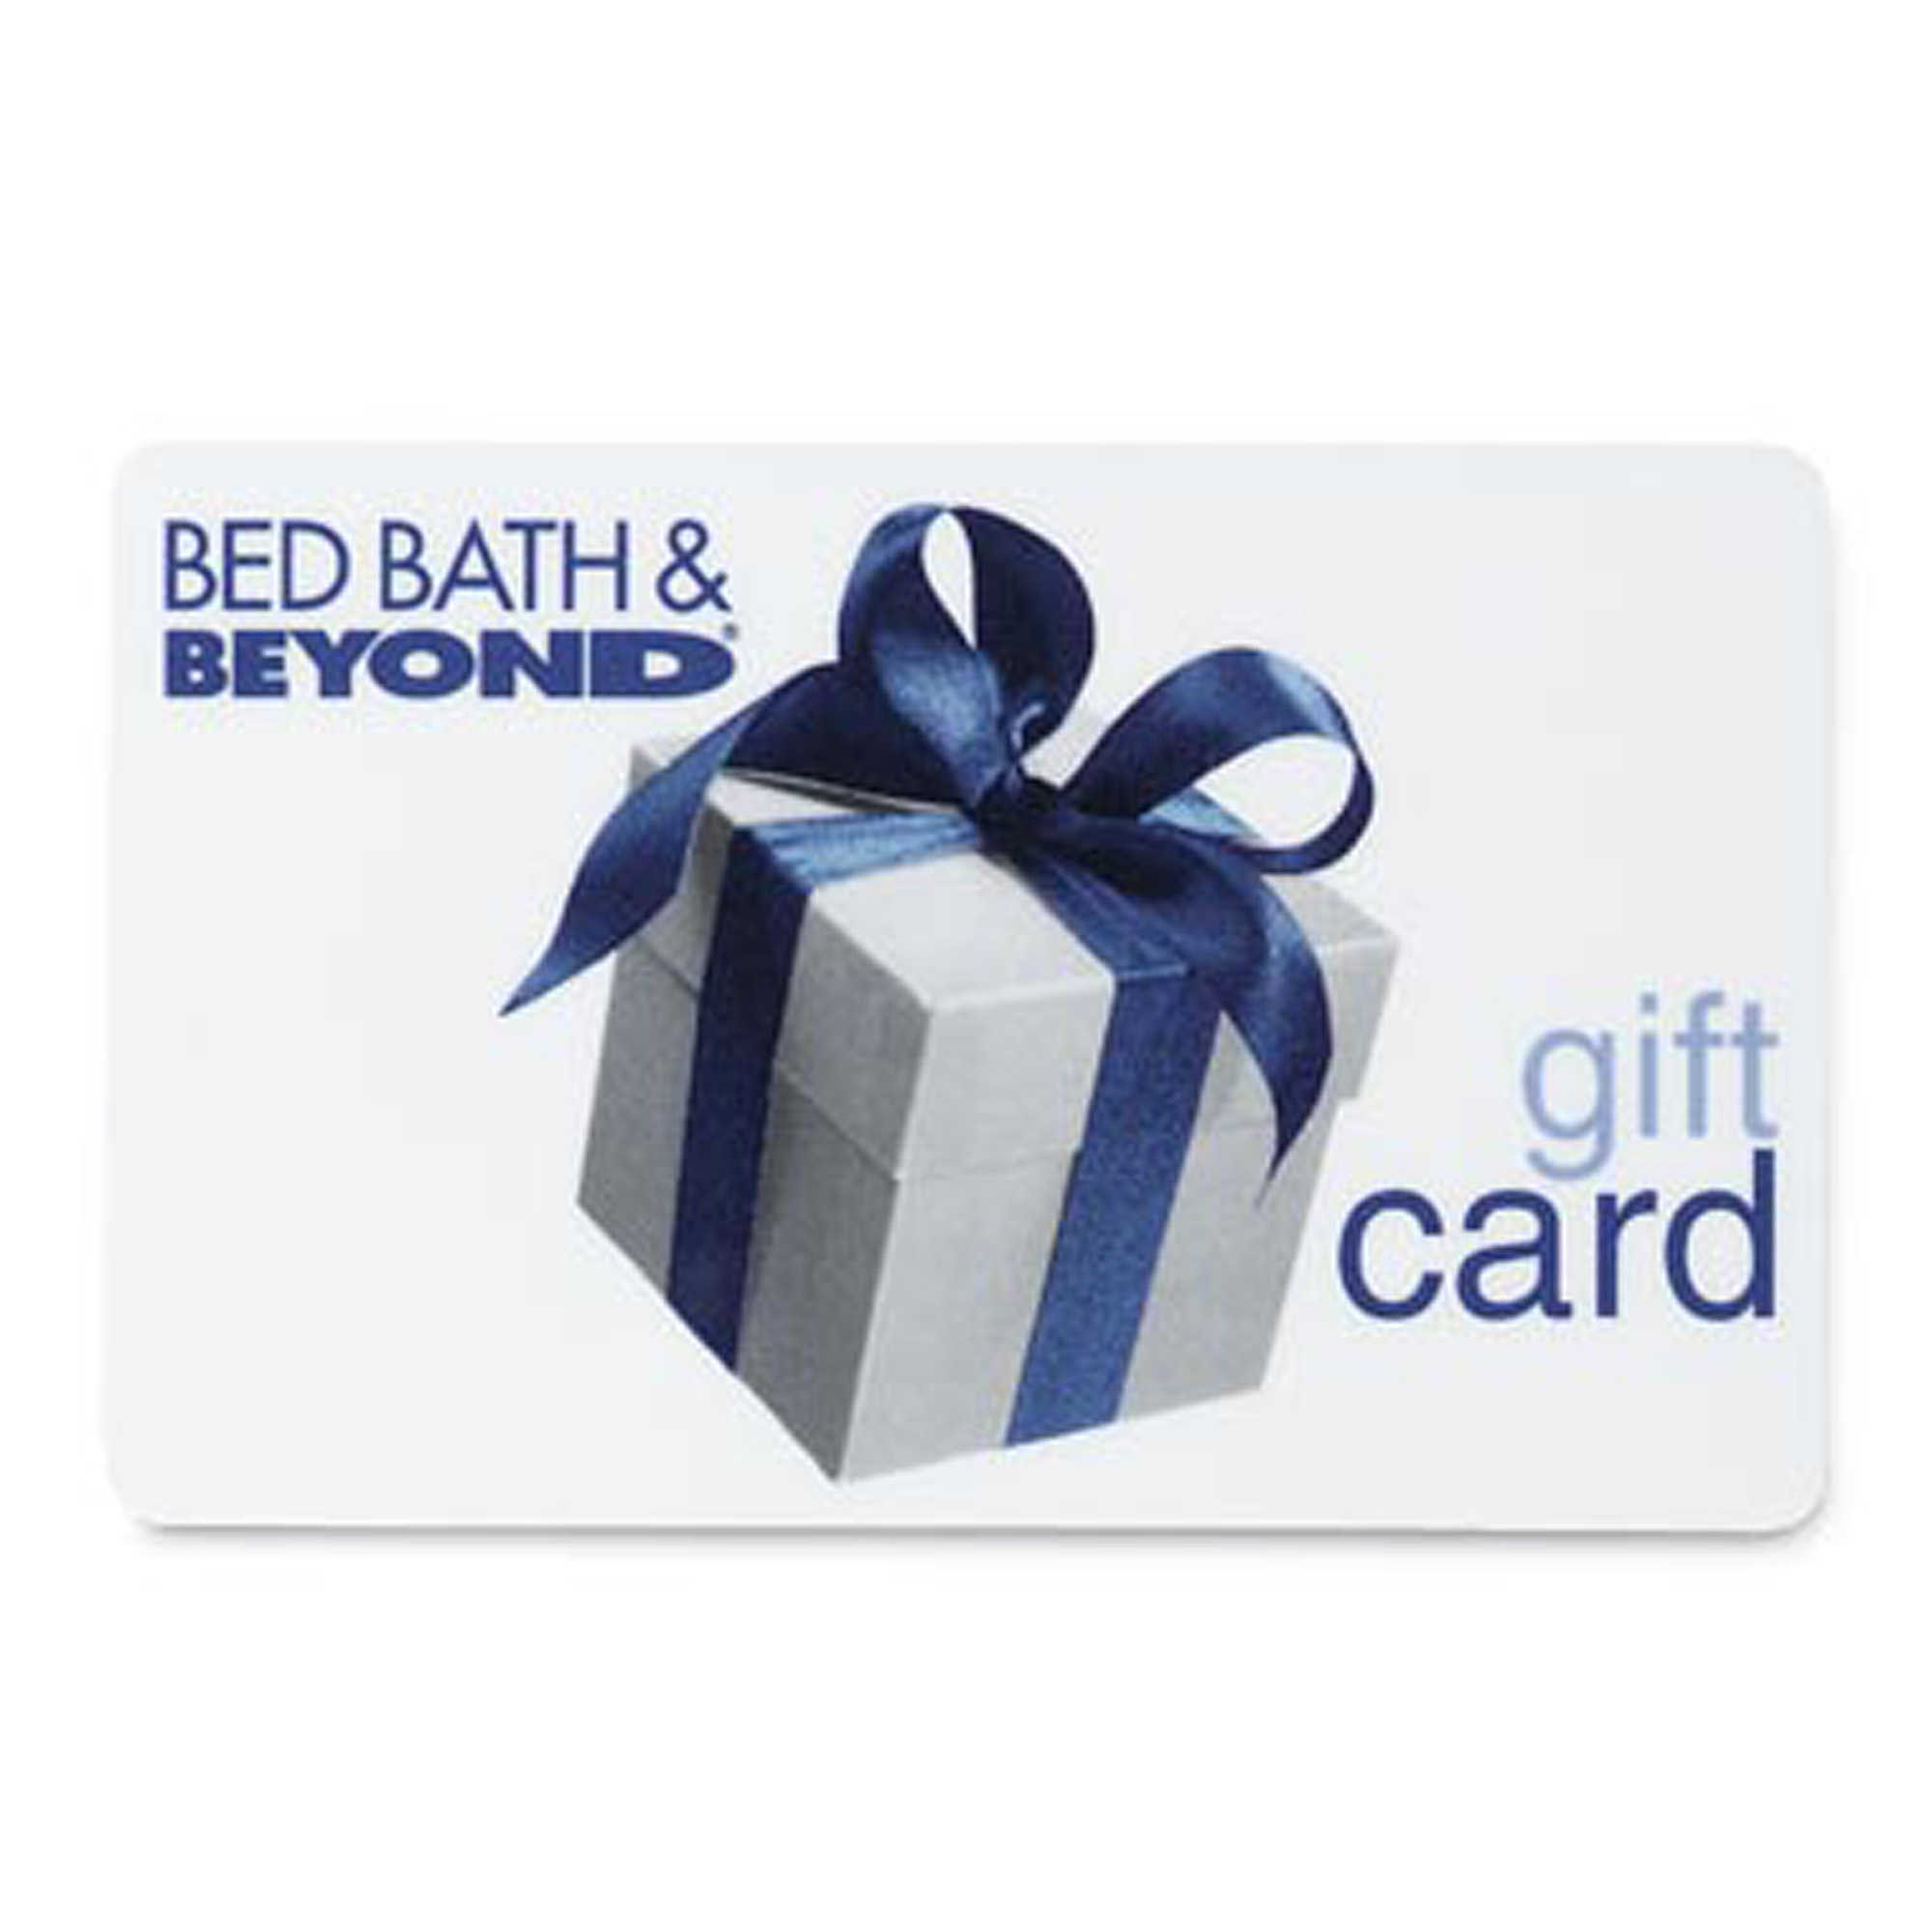 Buy Buy Baby Gift Card At Bed Bath And Beyond
 store account check balance